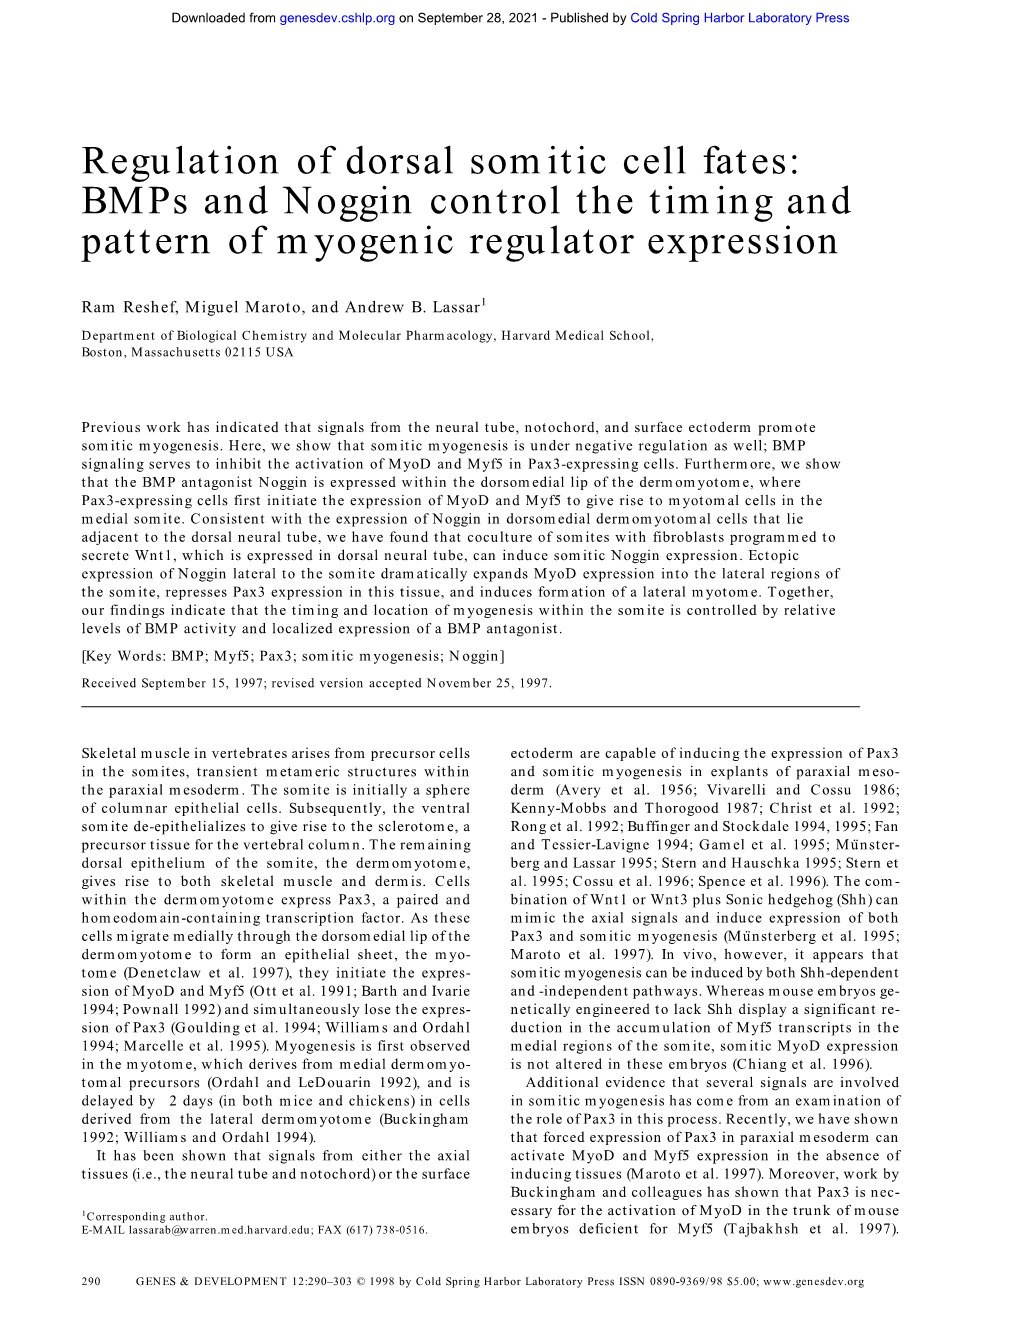 Regulation of Dorsal Somitic Cell Fates: Bmps and Noggin Control the Timing and Pattern of Myogenic Regulator Expression